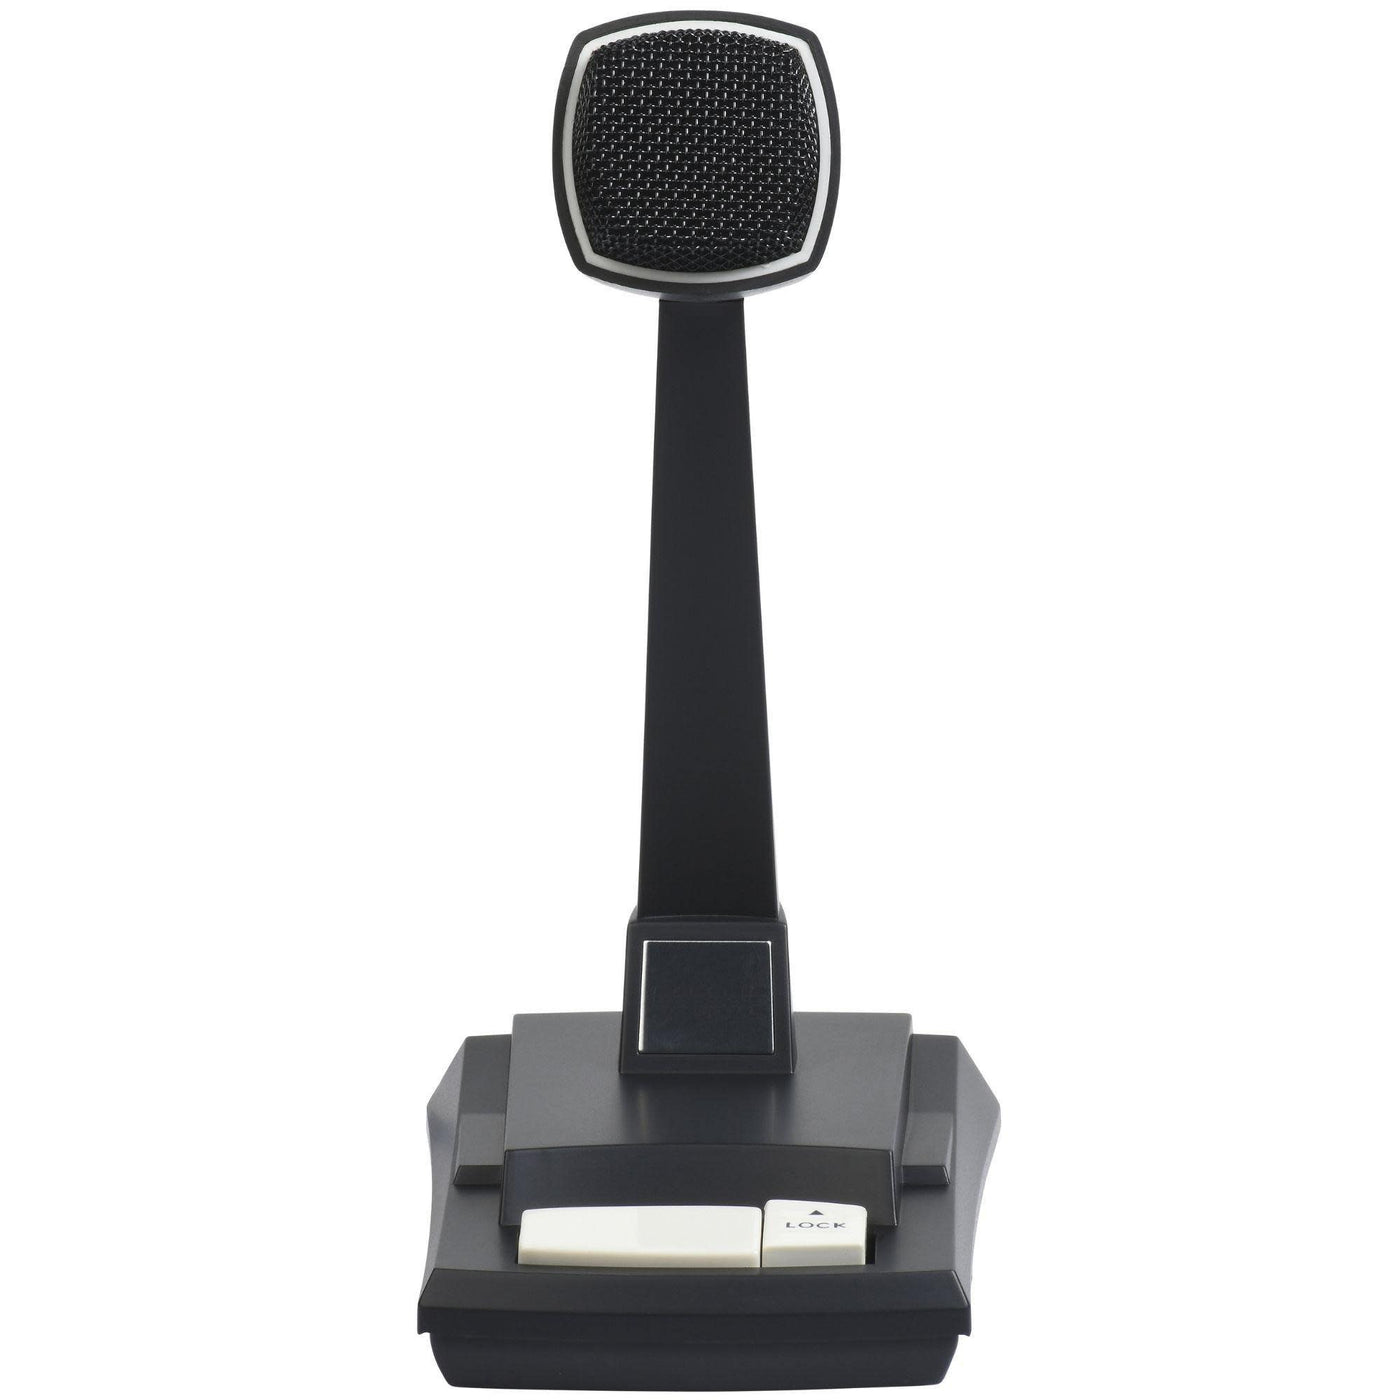 Astatic 878HL-2 Desktop Omnidirectional Dynamic Microphone with Push to Talk